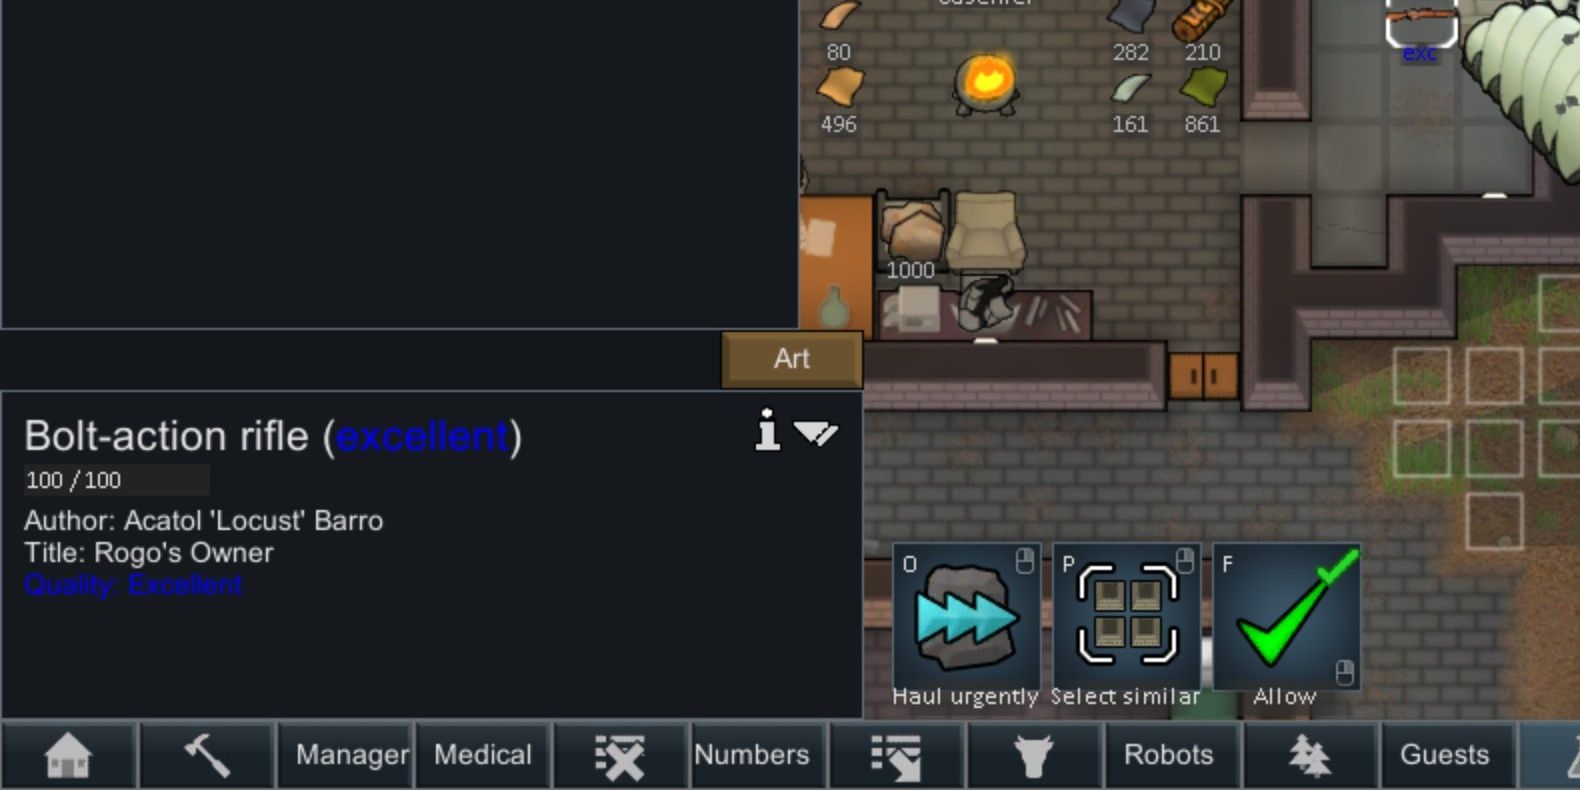 An excellent quality Bolt-action rifle in someones inventory in RimWorld